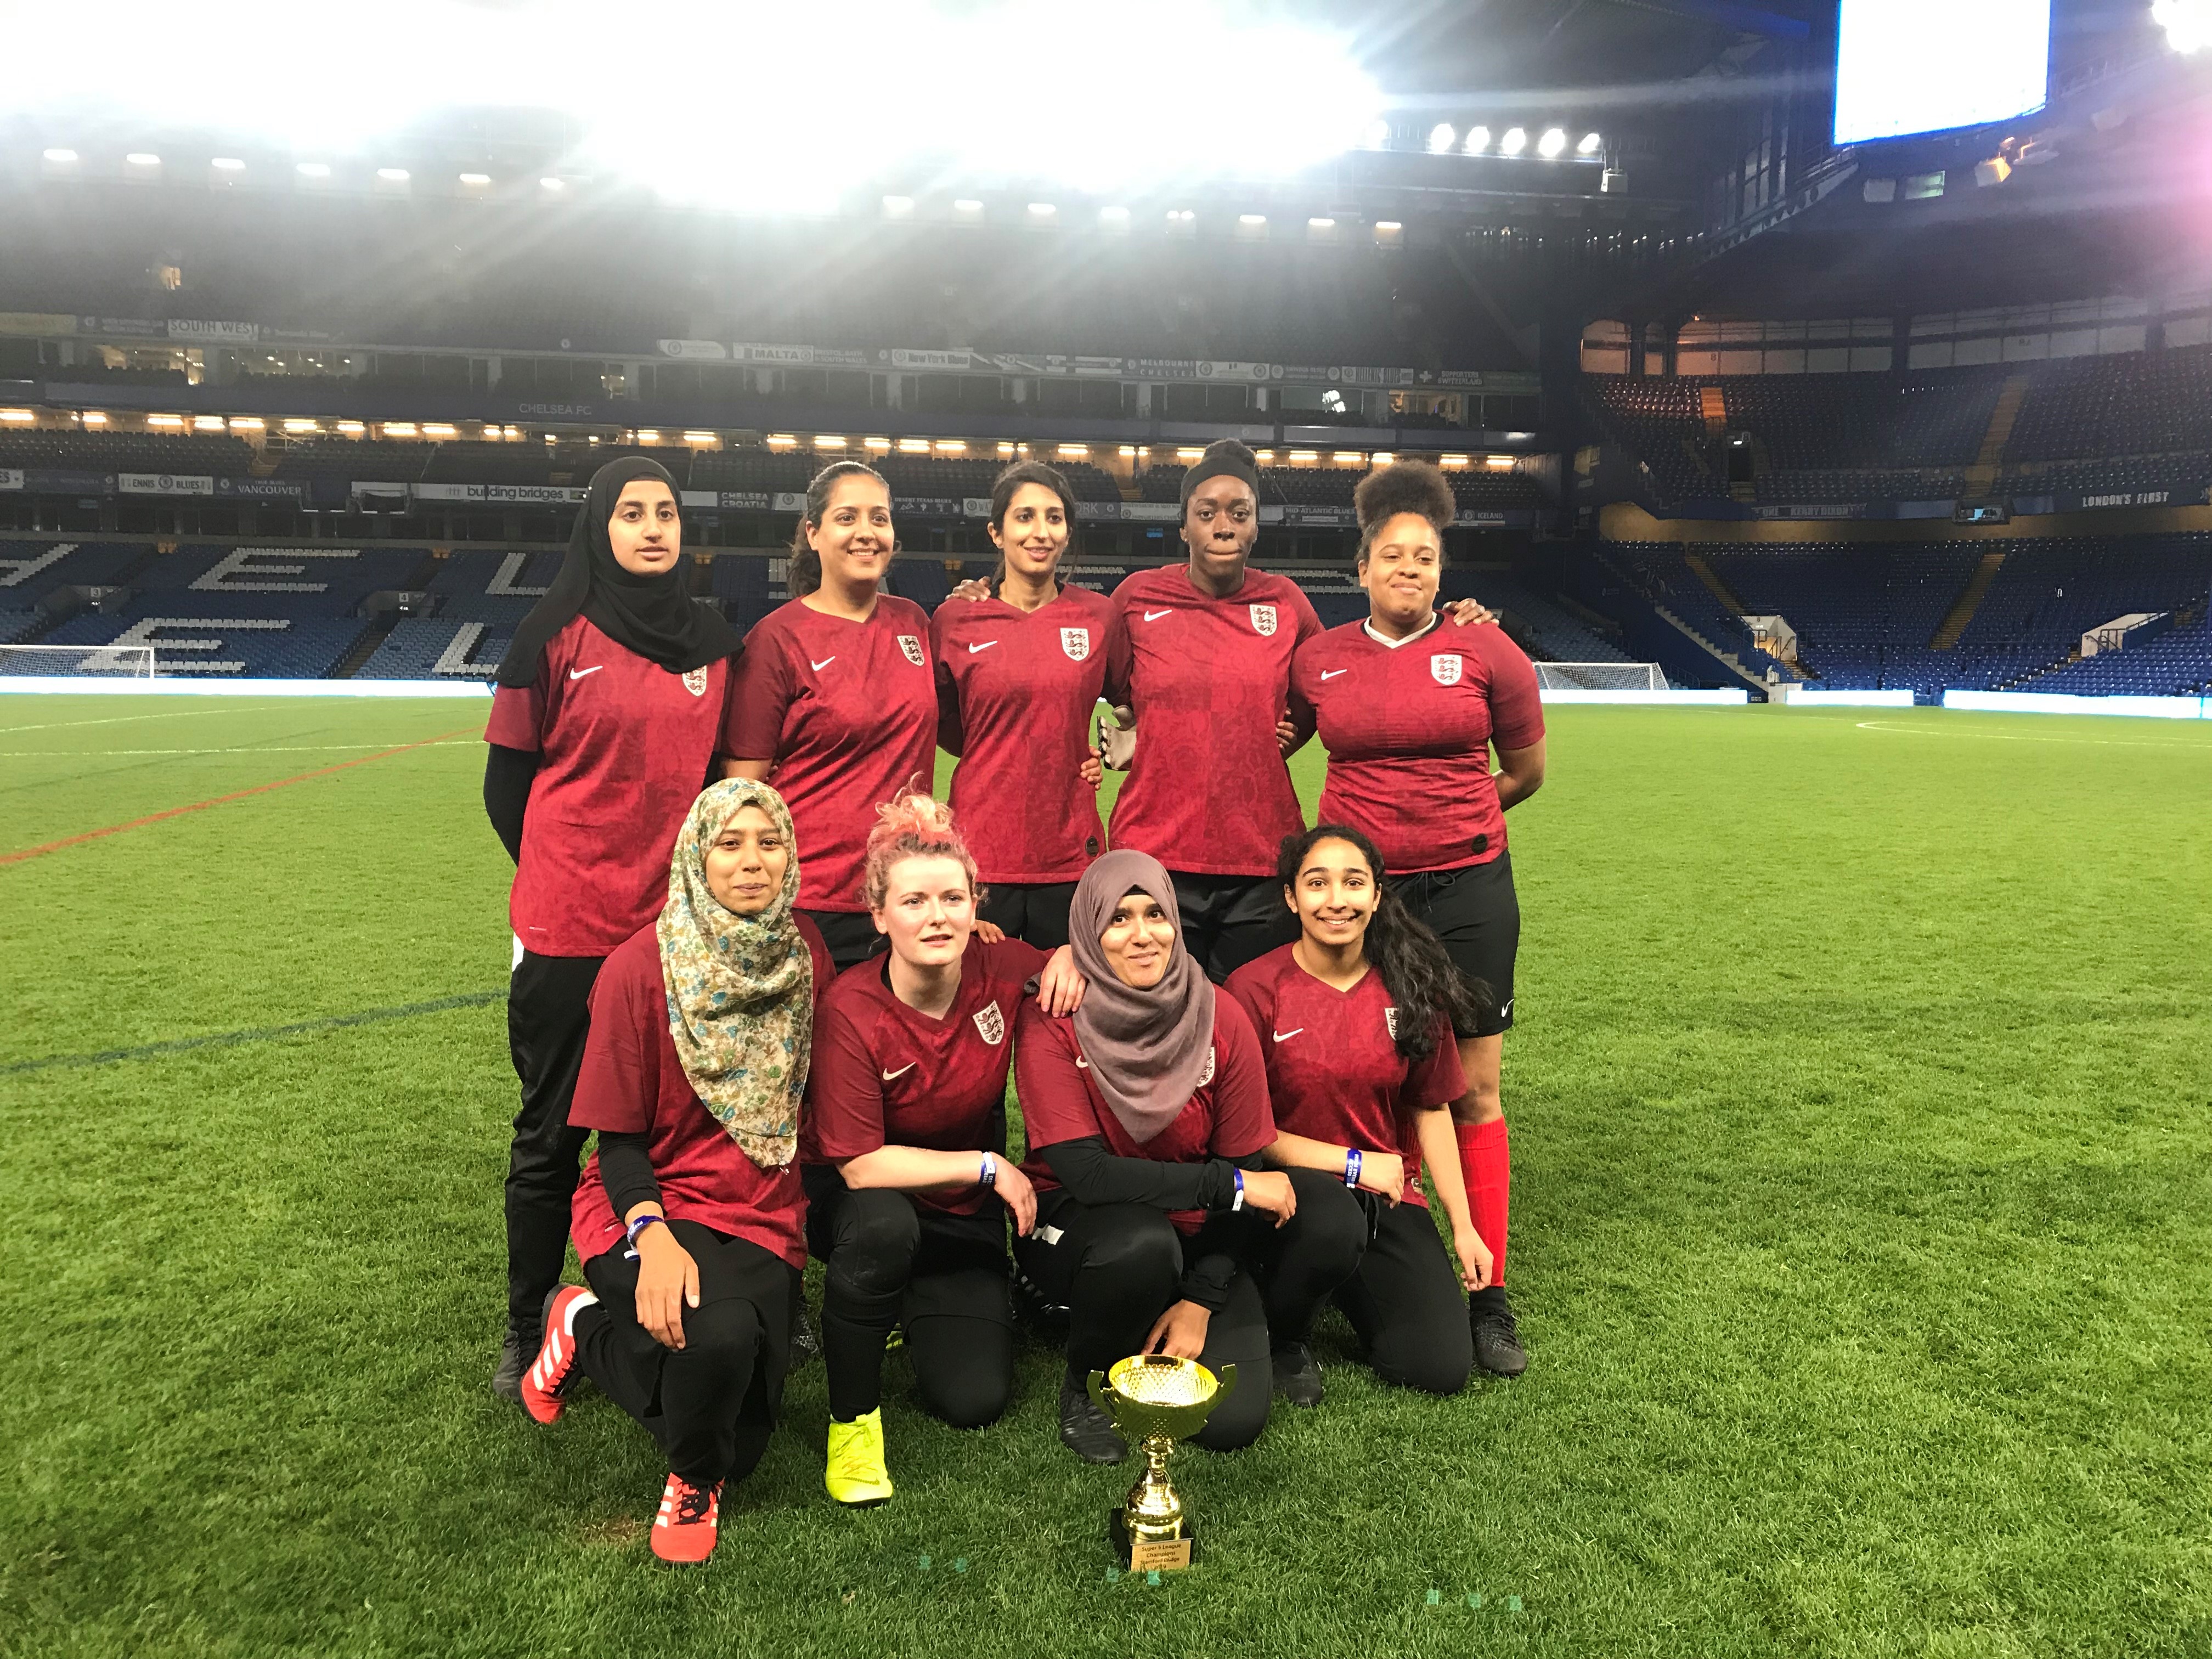 The MSA & Frenford FC team were winners at a five-a-side event at Stamford Bridge